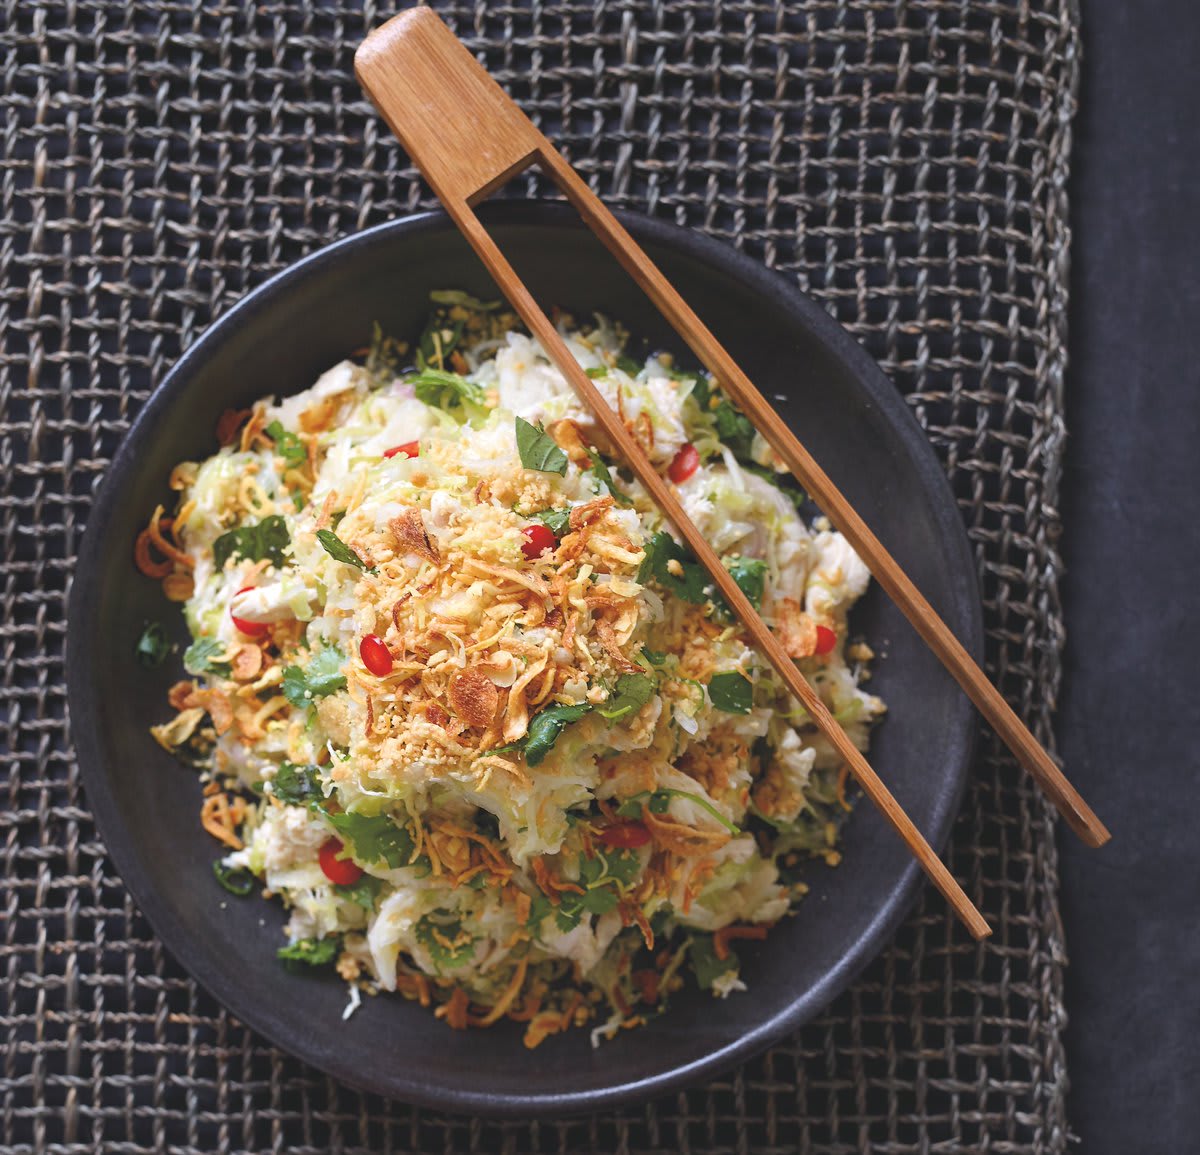 A crunchy take on a lunchtime favorite: Make this Burmese chicken salad for your next lunch